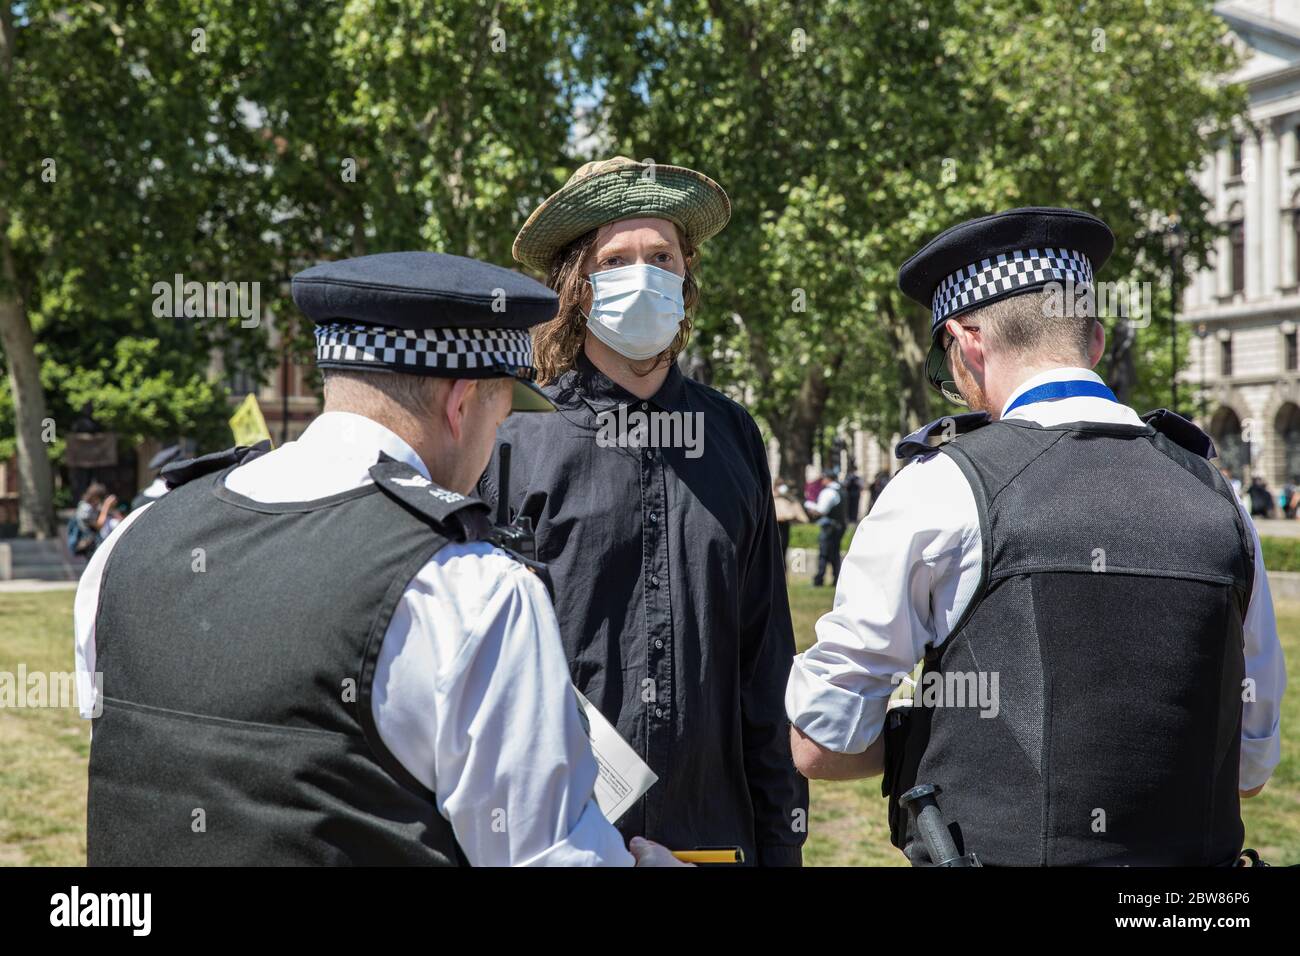 Parliament Square, London, UK. 30 May 2020. A few hundred environmental campaigners from Extinction Rebellion demonstrate peacefully in Parliament Square. Protesters hold placards, demand decisive action from the UK Government on the global environmental crisis. Activists are standing with face masks on and maintain appropriate social distancing. Police questions individual campaigners prompting them to move on; some are body searched and arrests follow for breach of Covid-19 regulations. Stock Photo